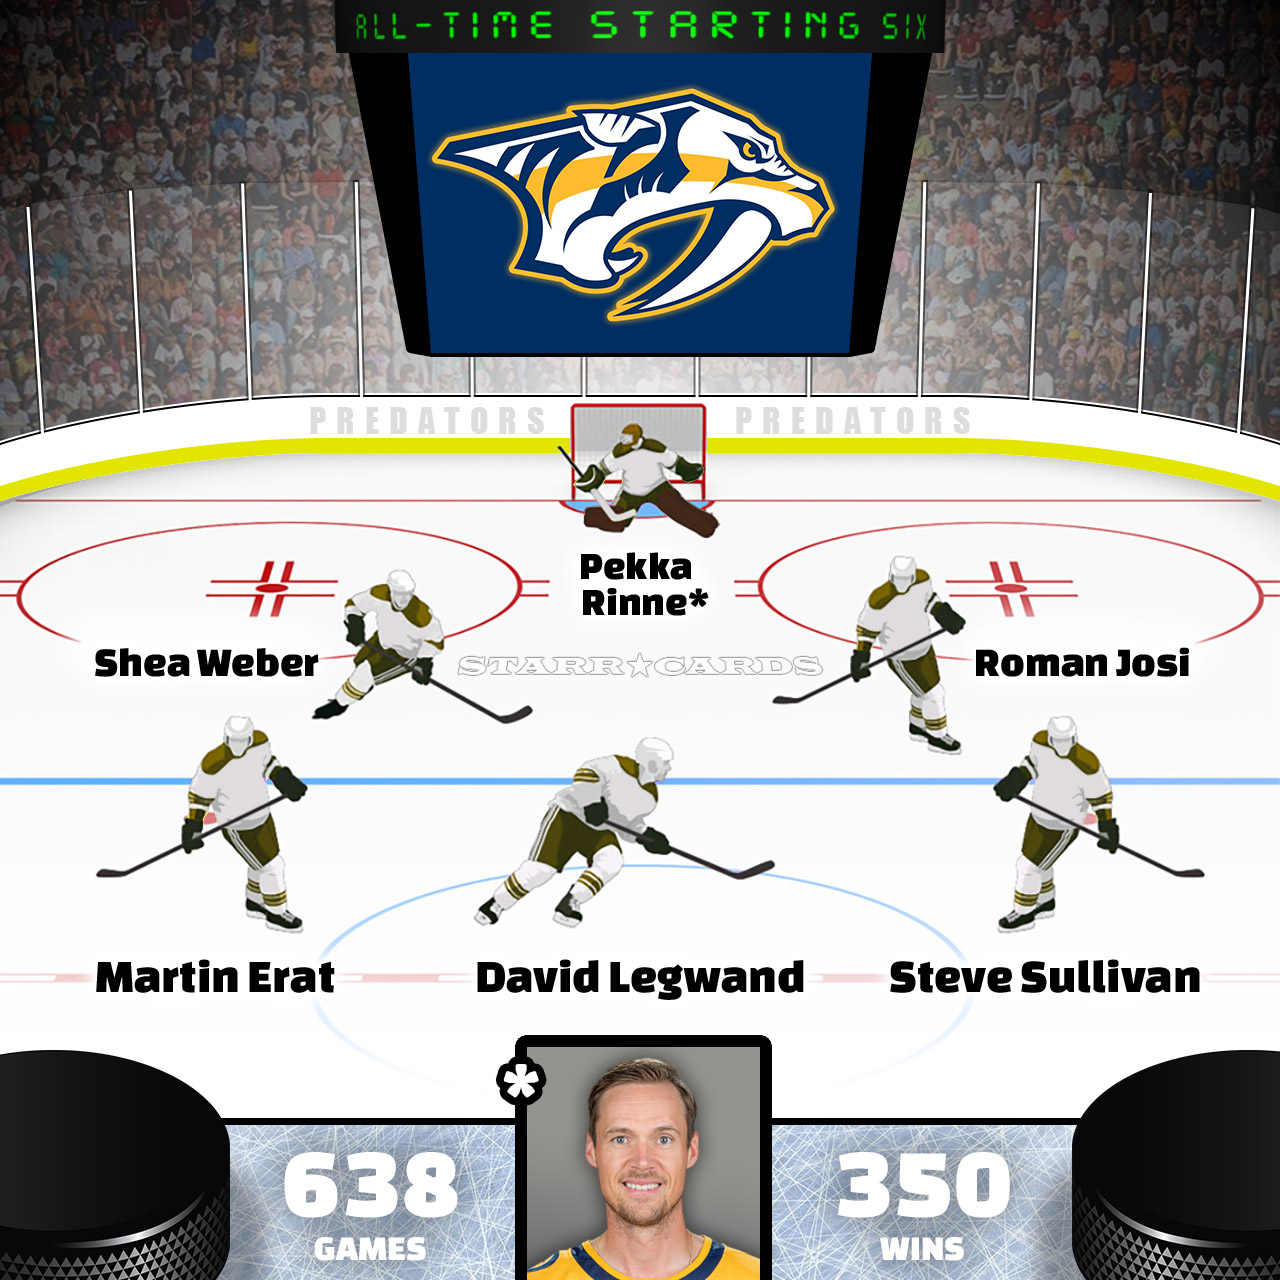 Pekka Rinne leads Nashville Predators all-time starting six by Point Shares